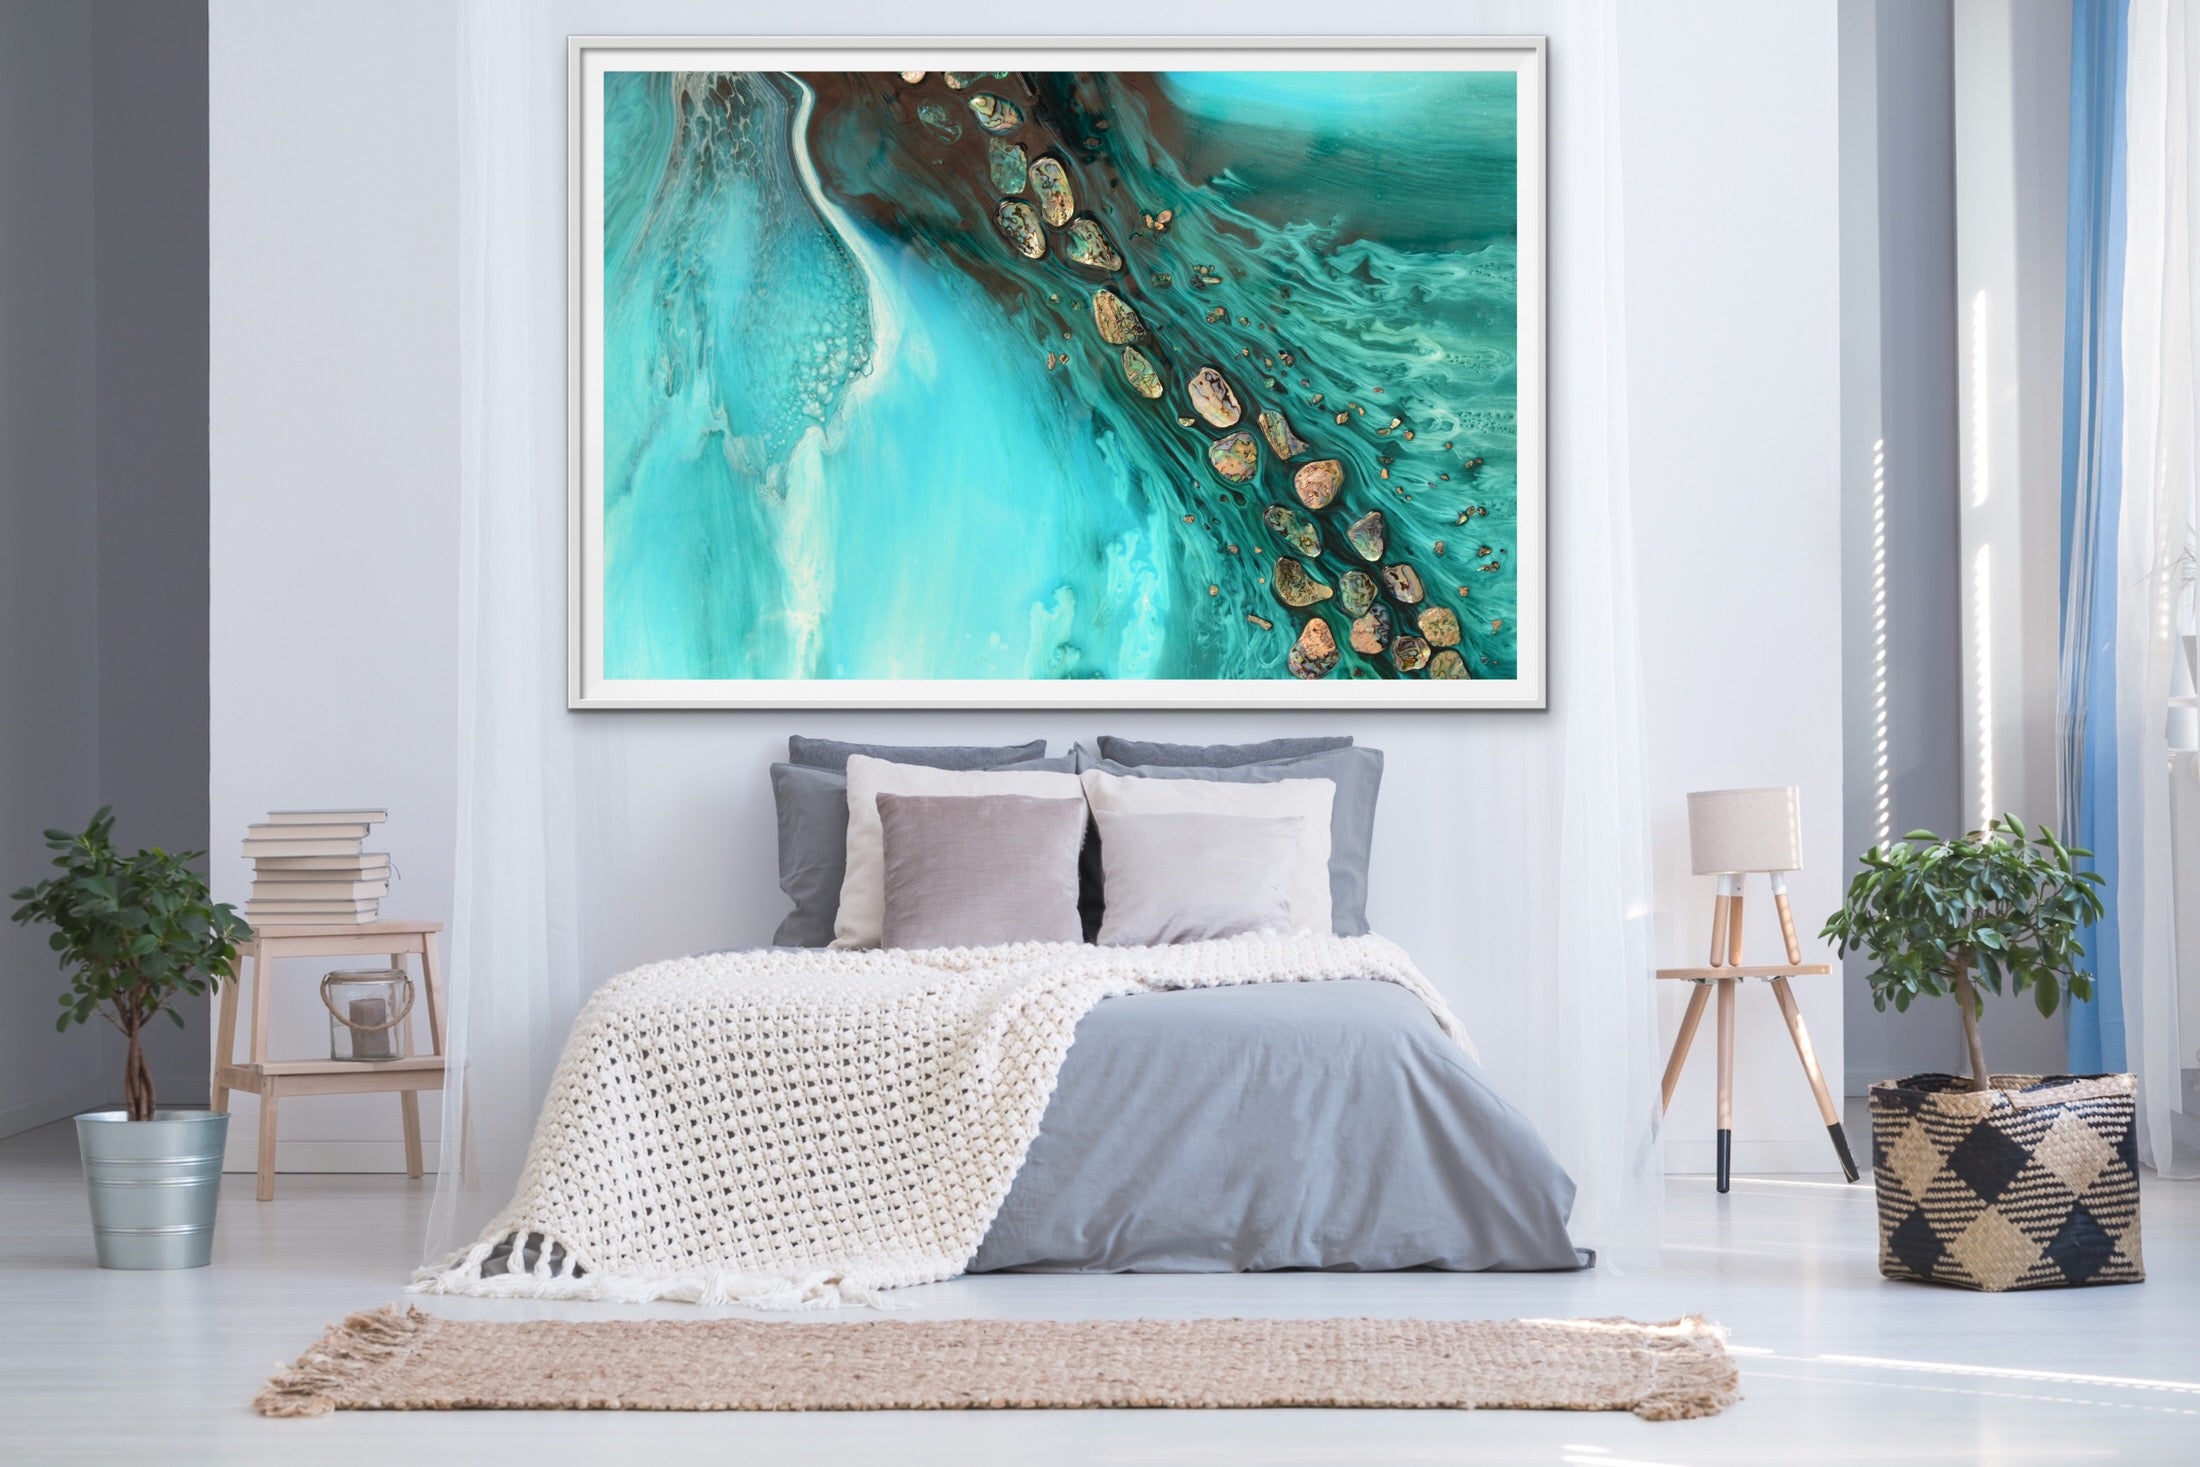 Abstract Ocean. Teal & Aqua. Rise Above Tide 3. Art Print. Antuanelle Artwork. Limited Edition Print